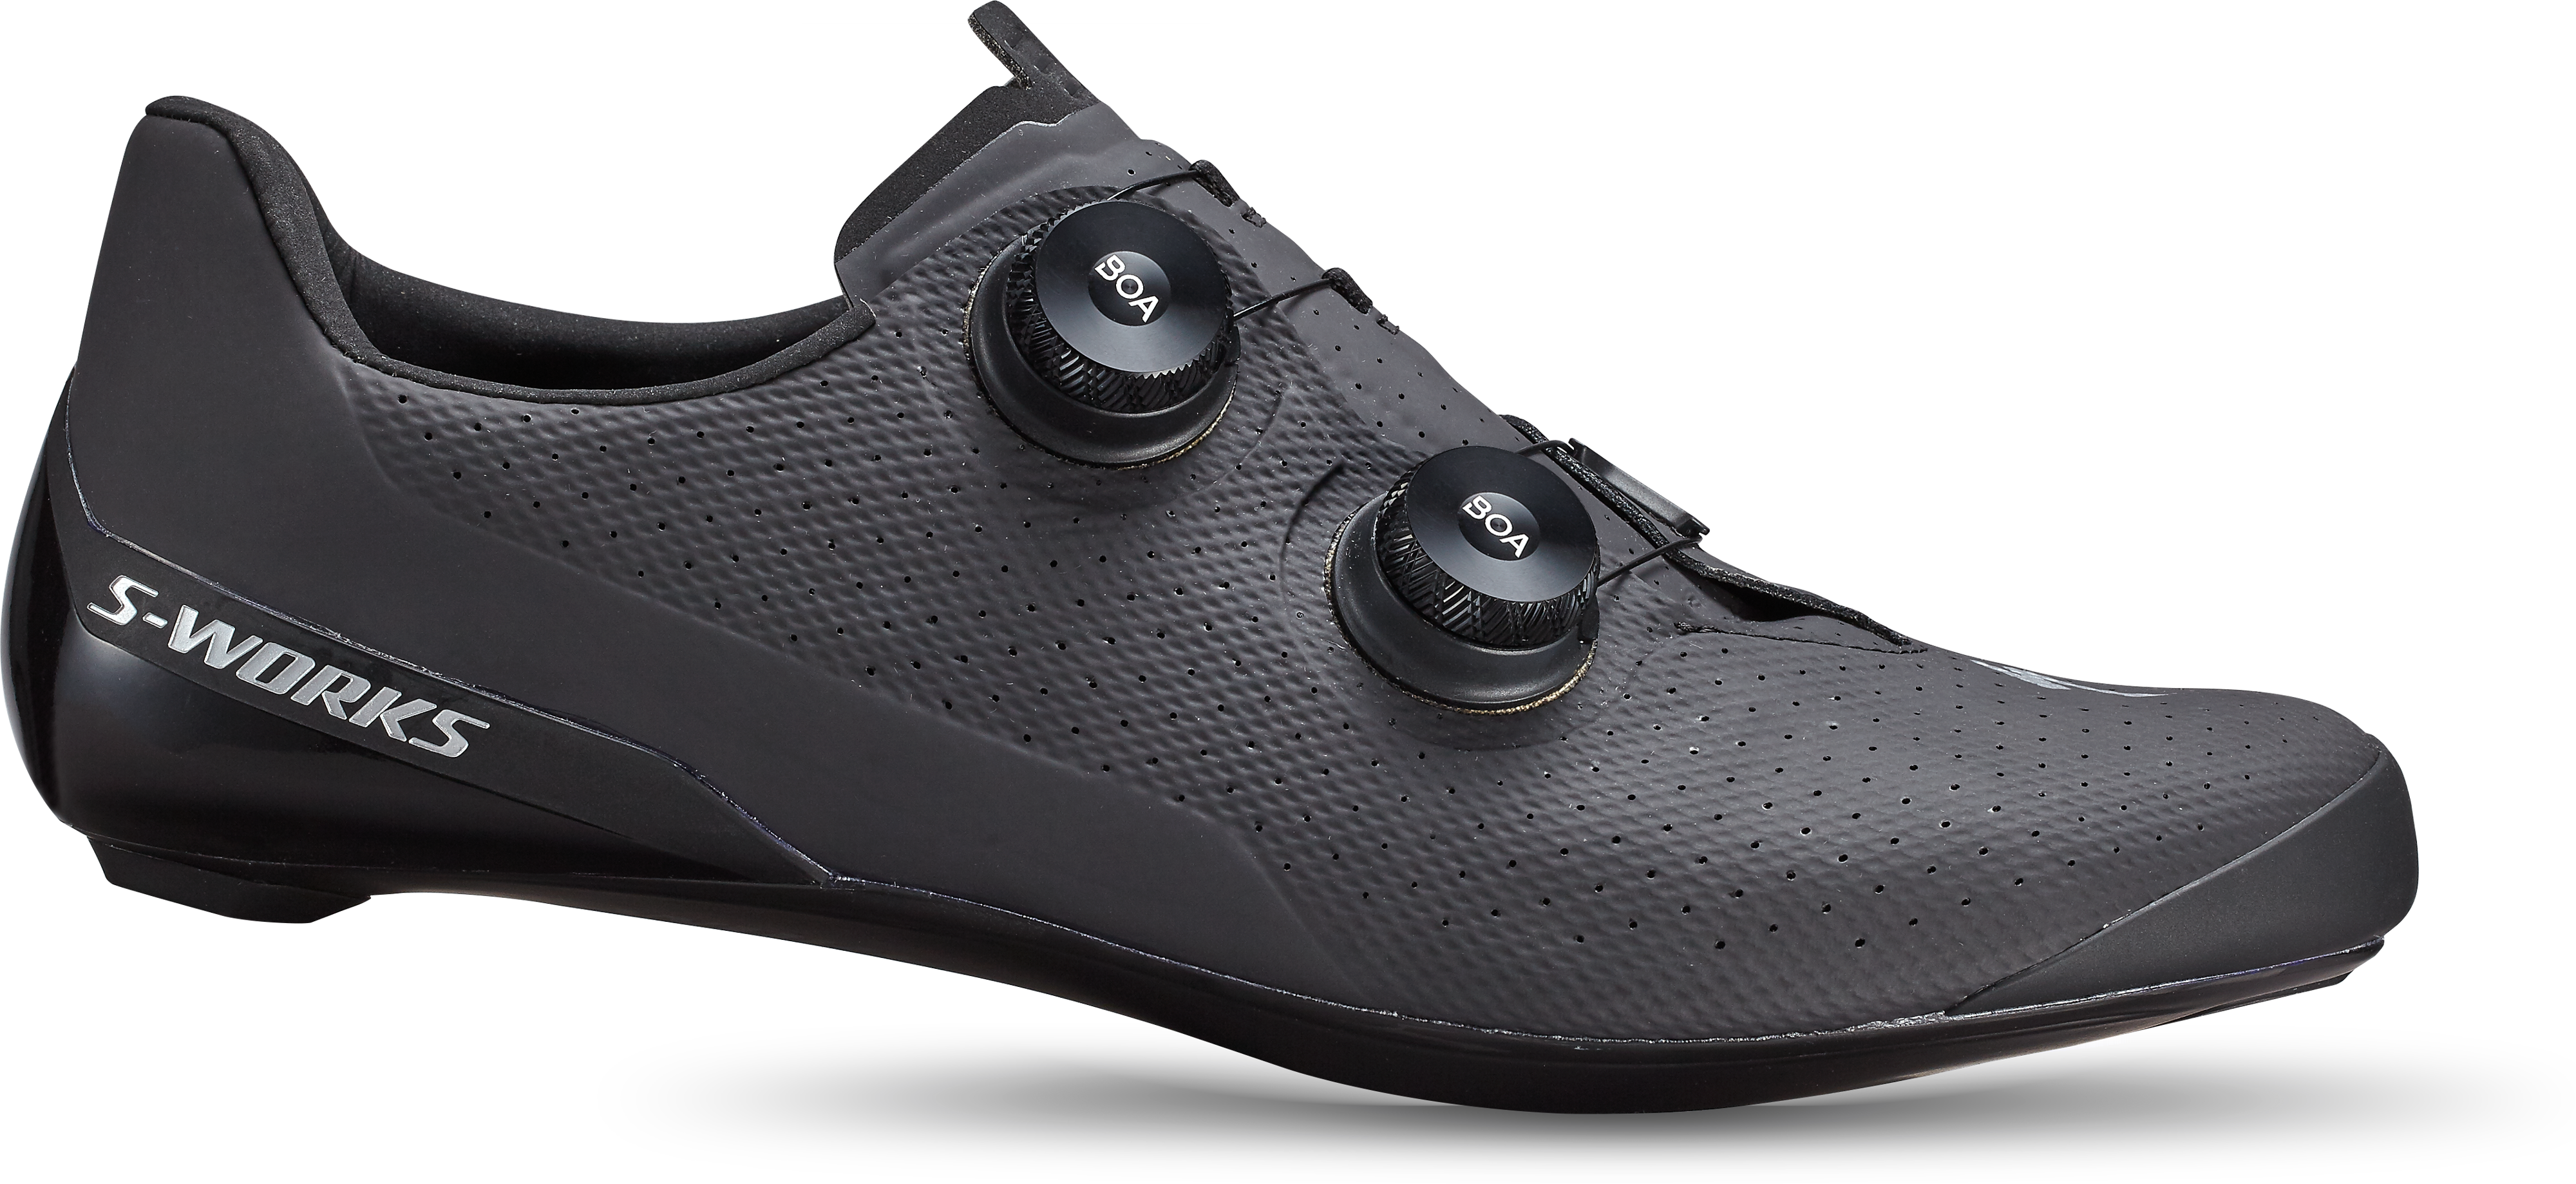 S-WORKS TORCH ROAD SHOES BLK 44(44 (28.3cm) ブラック): シューズ 